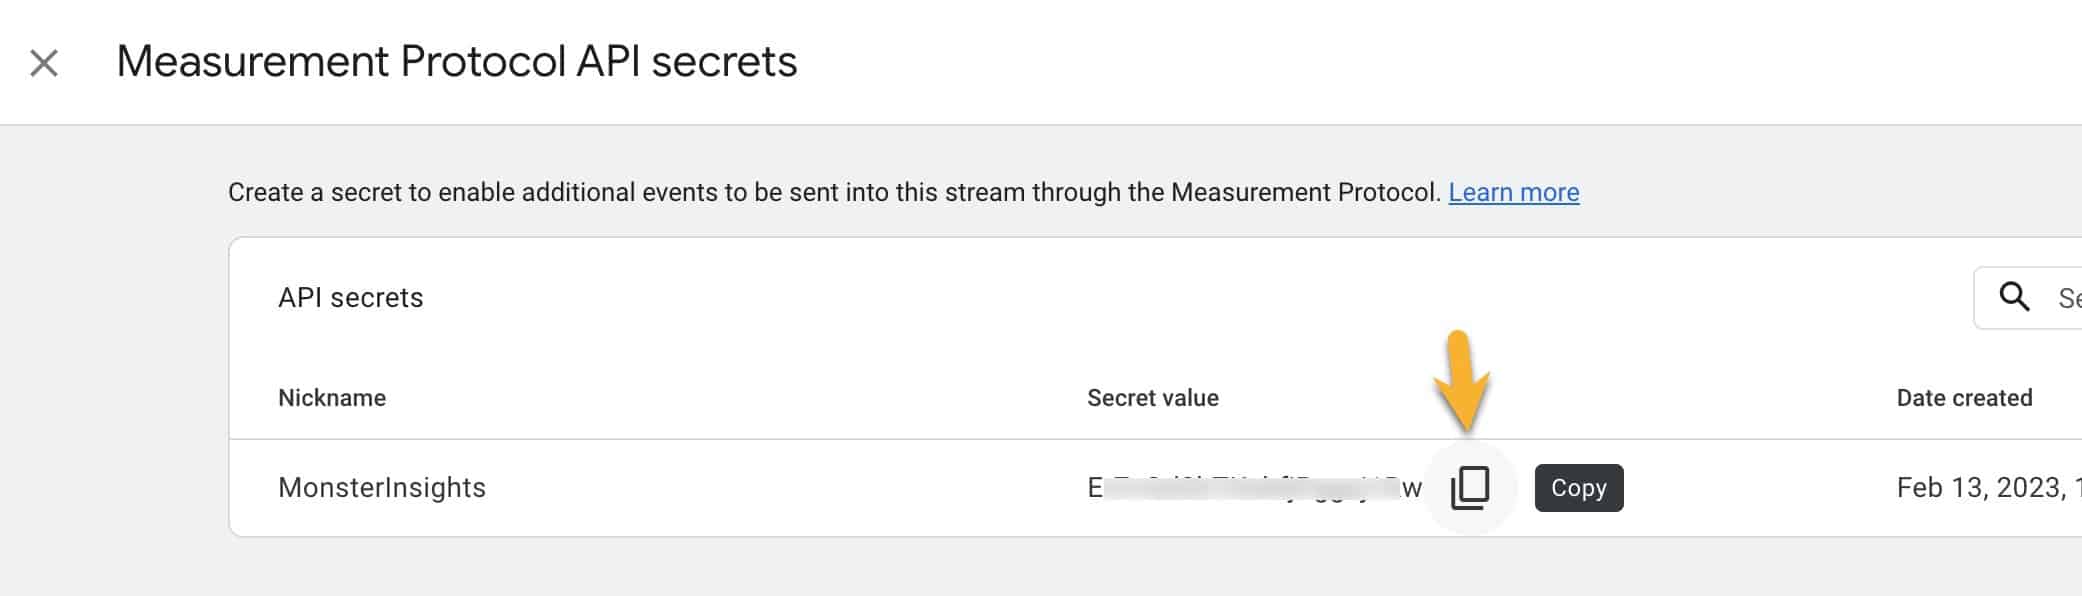 Screenshot showing the API secret value, so you can copy it to the clipboard